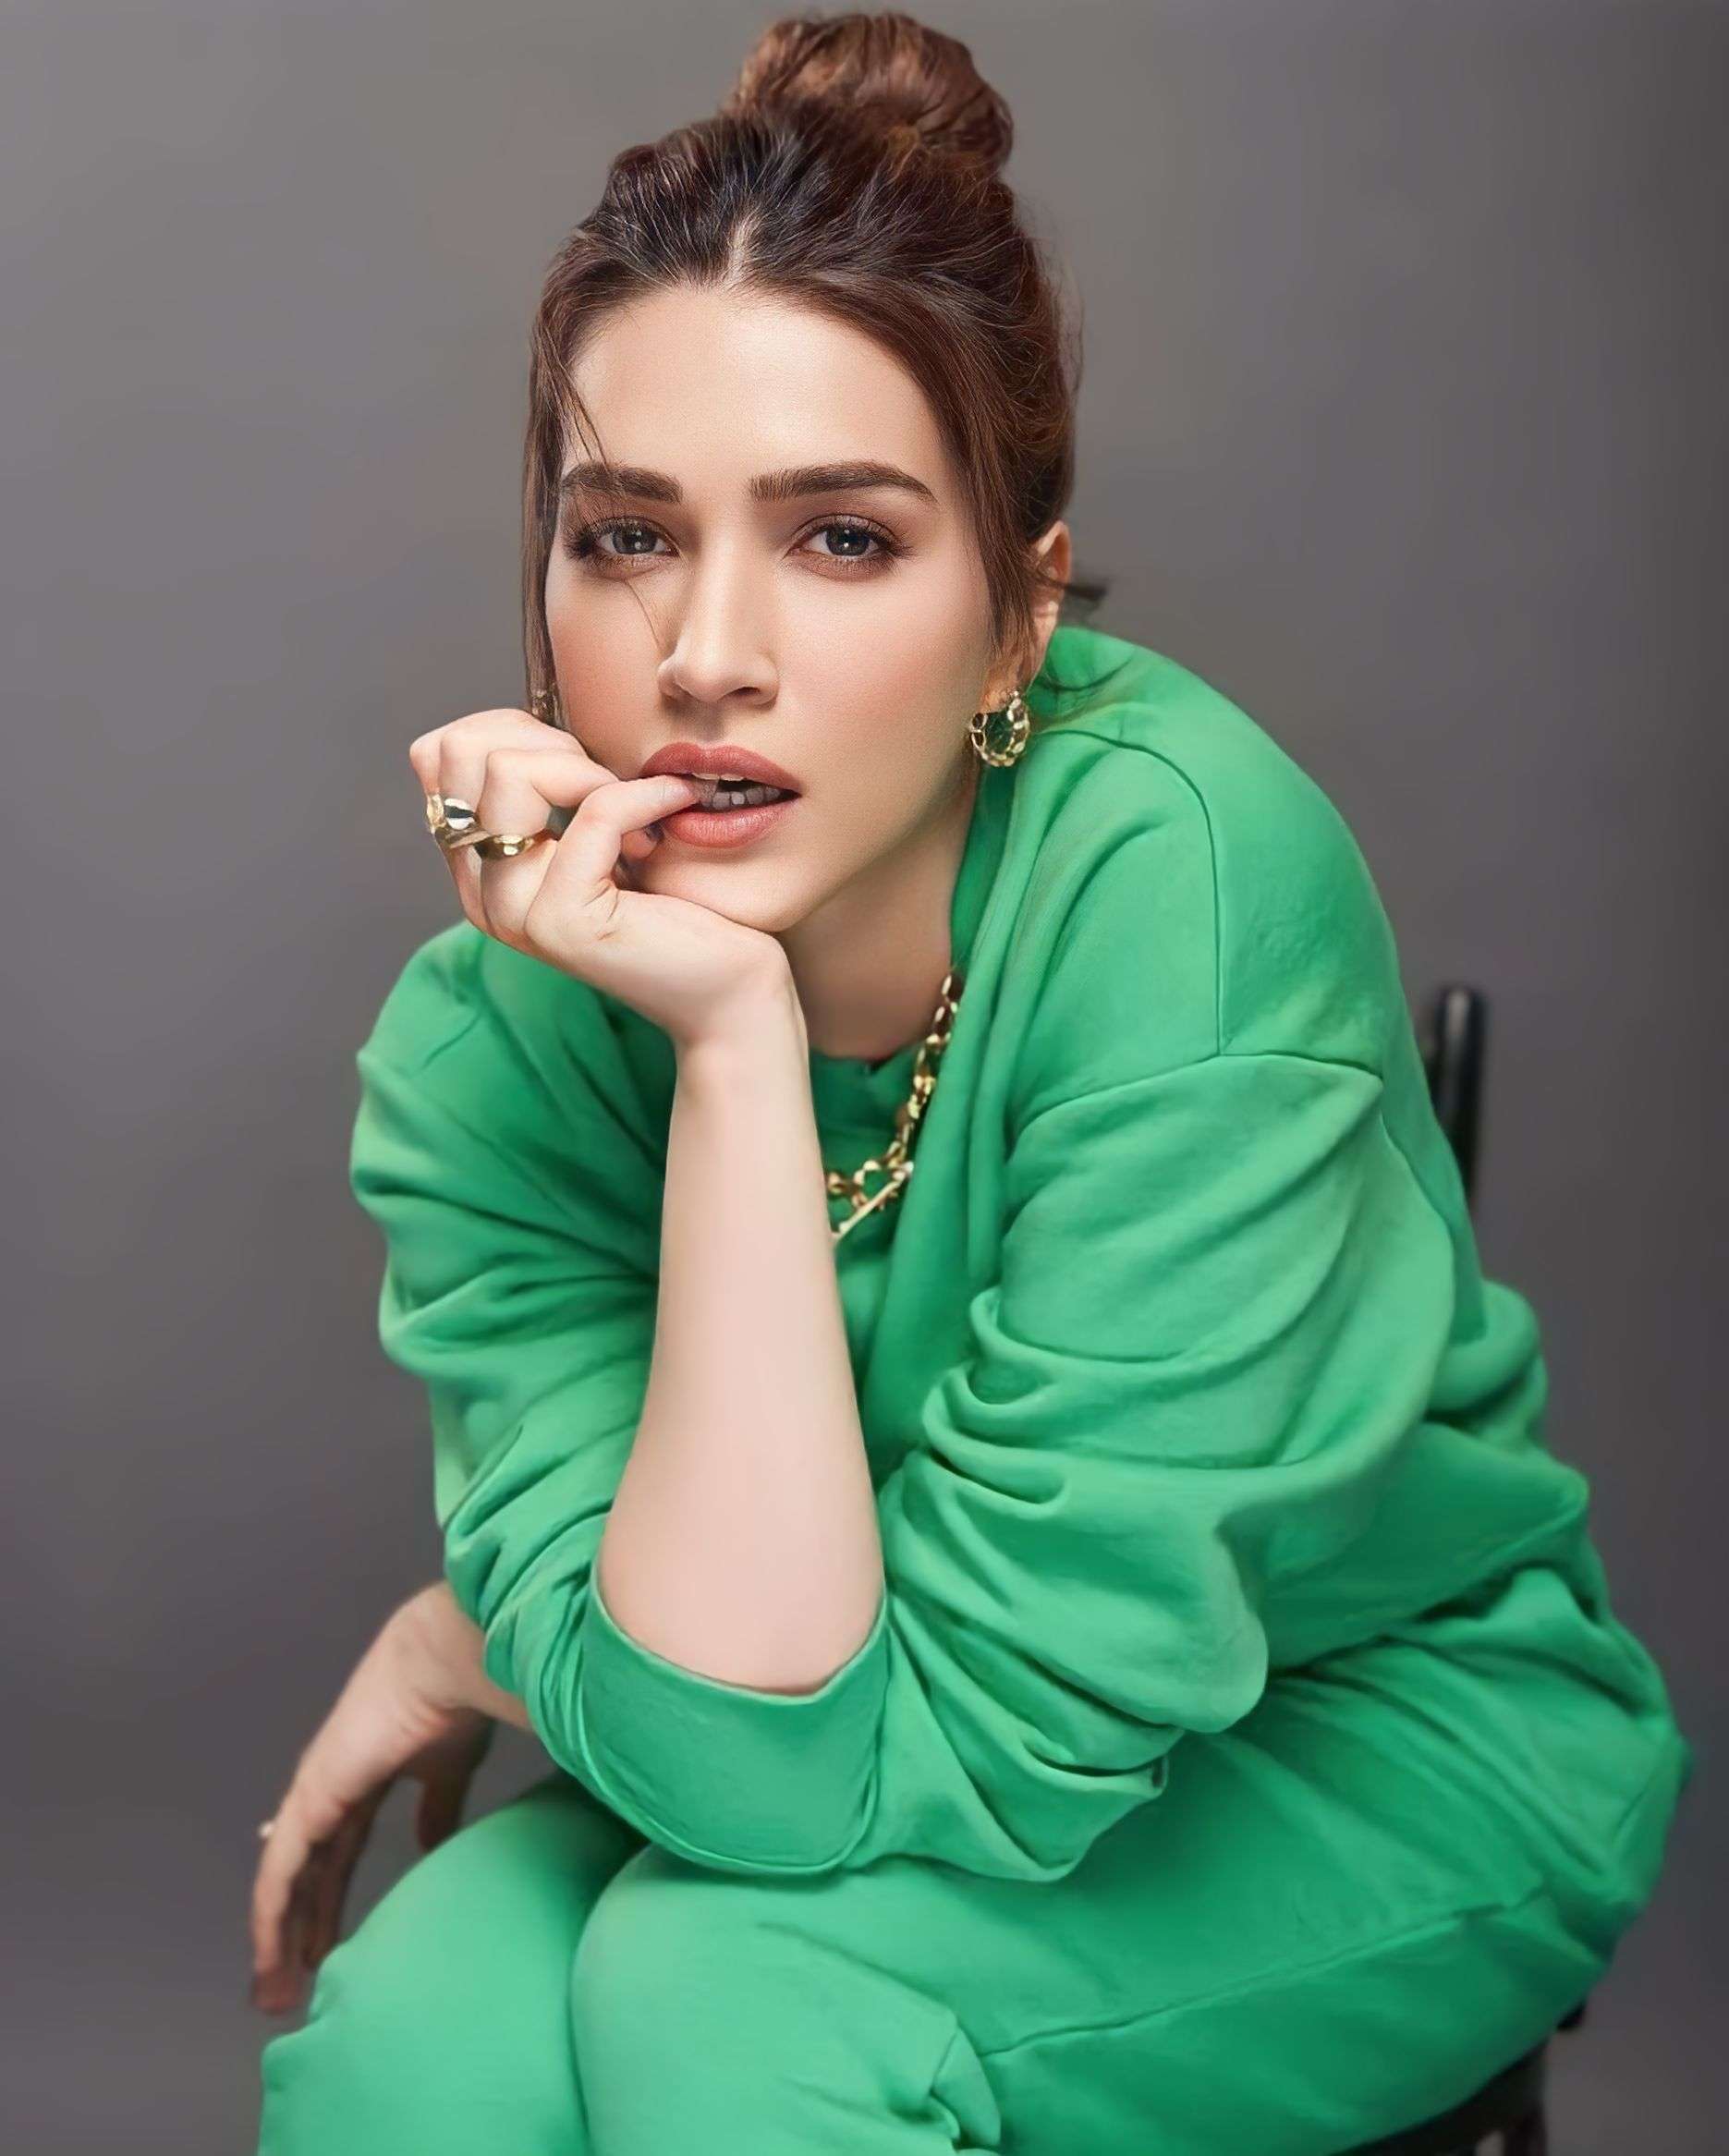 Bareilly Ki Sexy Video - Kriti Sanon, pics, husband, boobs, video, hot scene, latest photos, pics,  slip, without makeup, house, all movies list, hot dress, height weight,  biography, boyfriend, age, net worth - Know Your Celebs